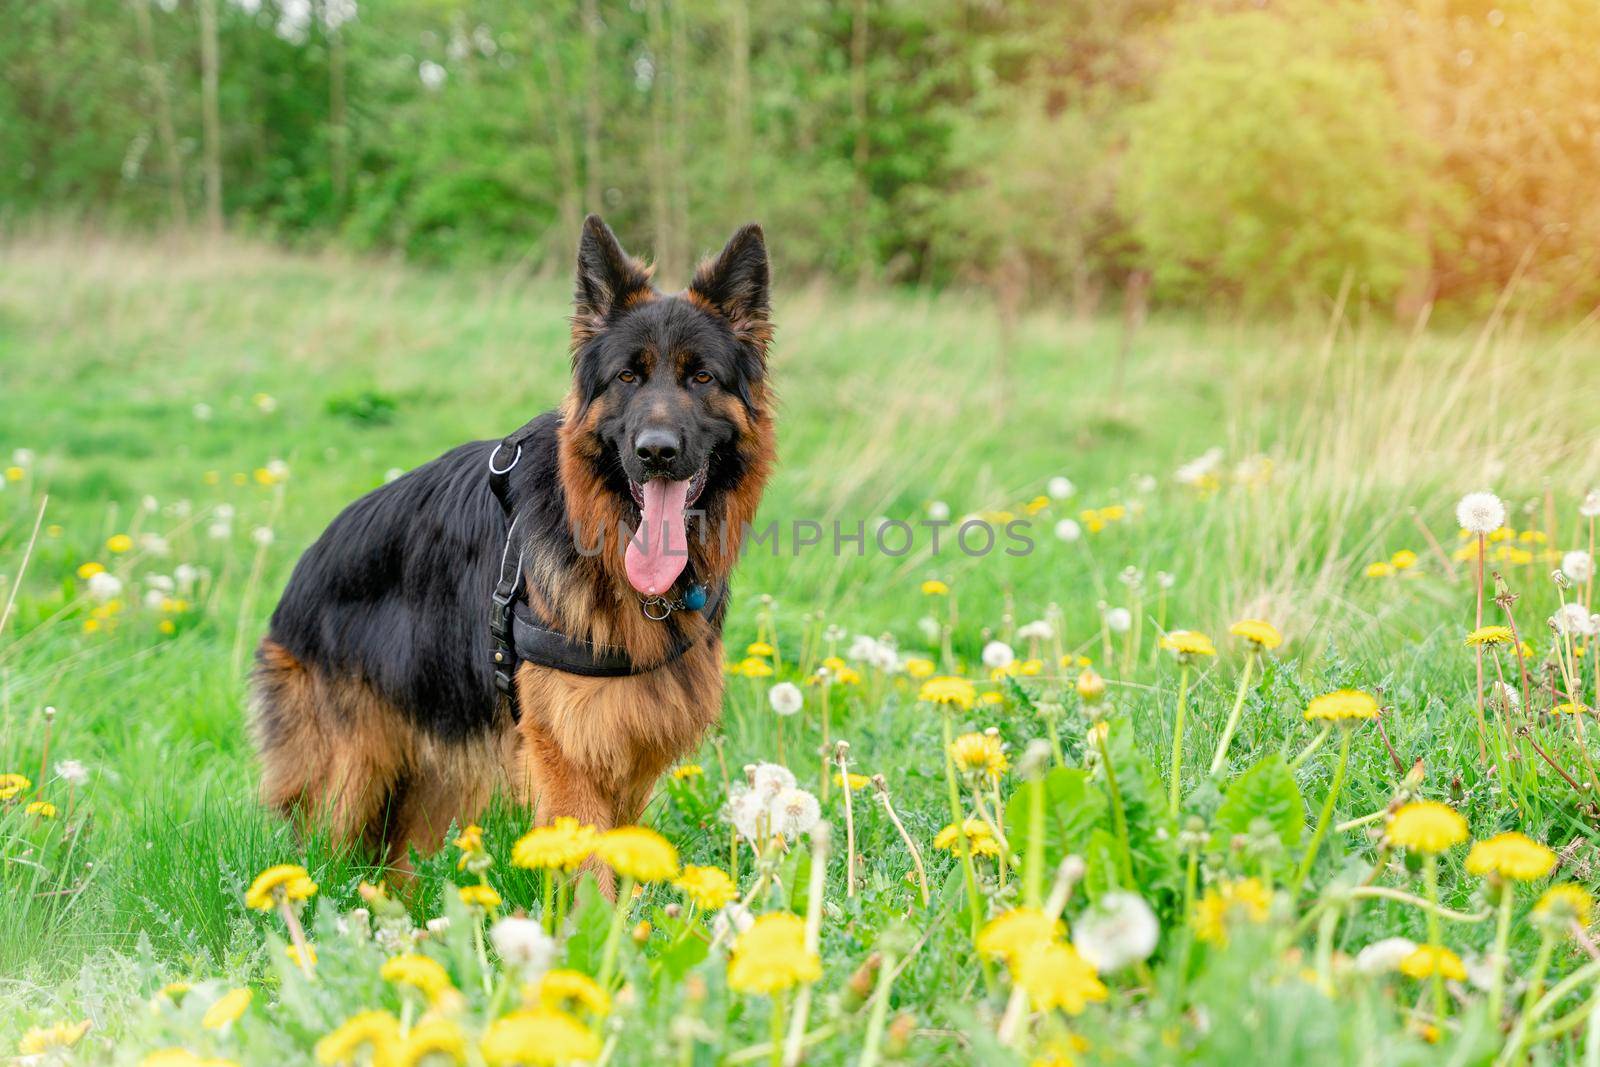 German shepherd dog in harness out for a walk on the grass near forest in sunny summer day by Iryna_Melnyk